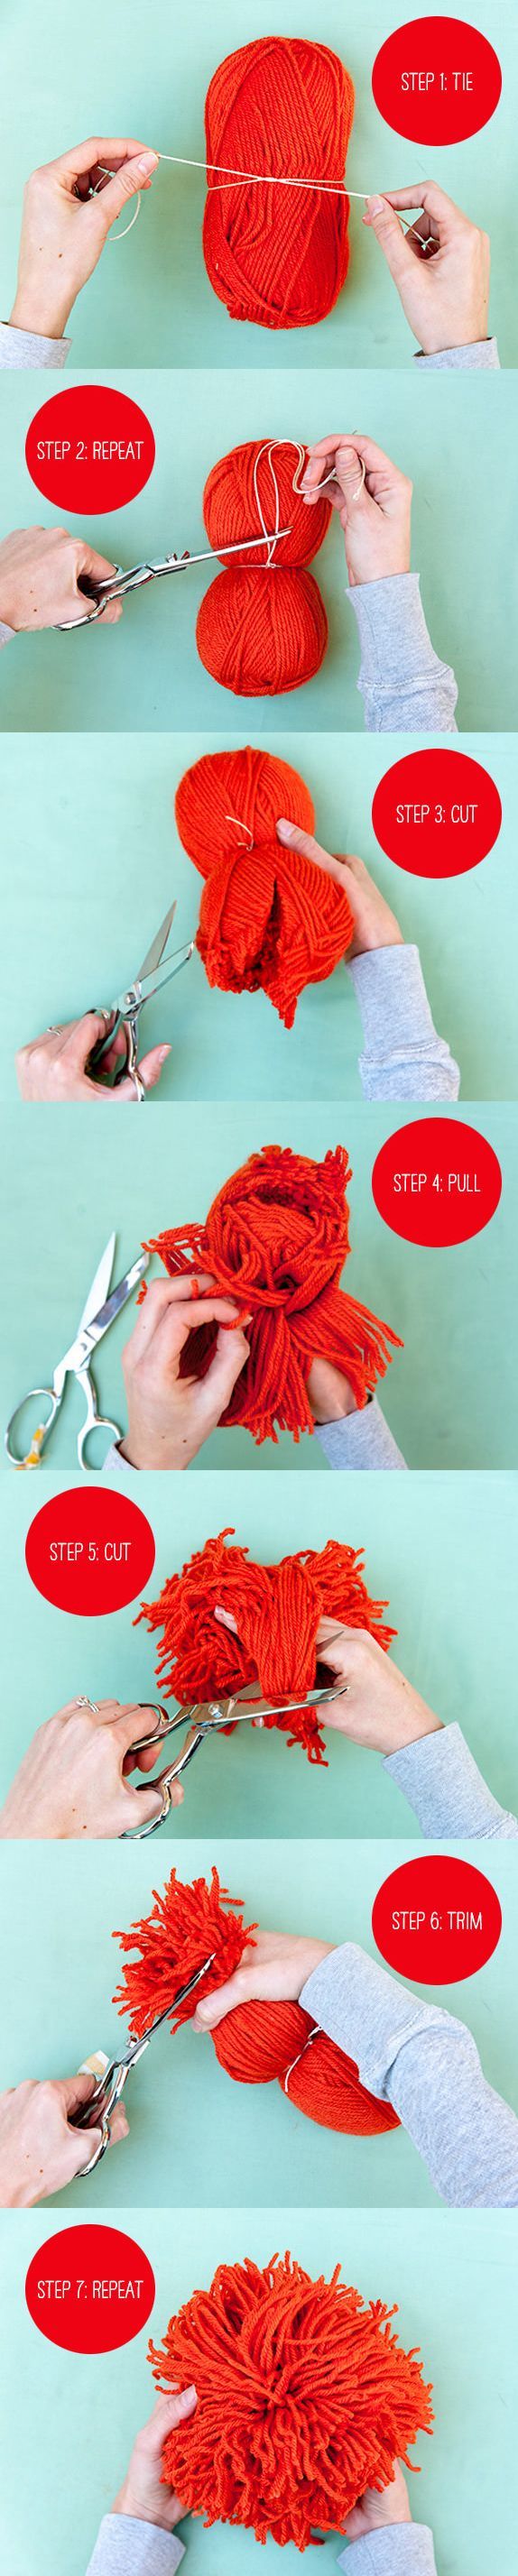 Make the biggest pom-pom youve ever imagined with an entire skein of yarn.